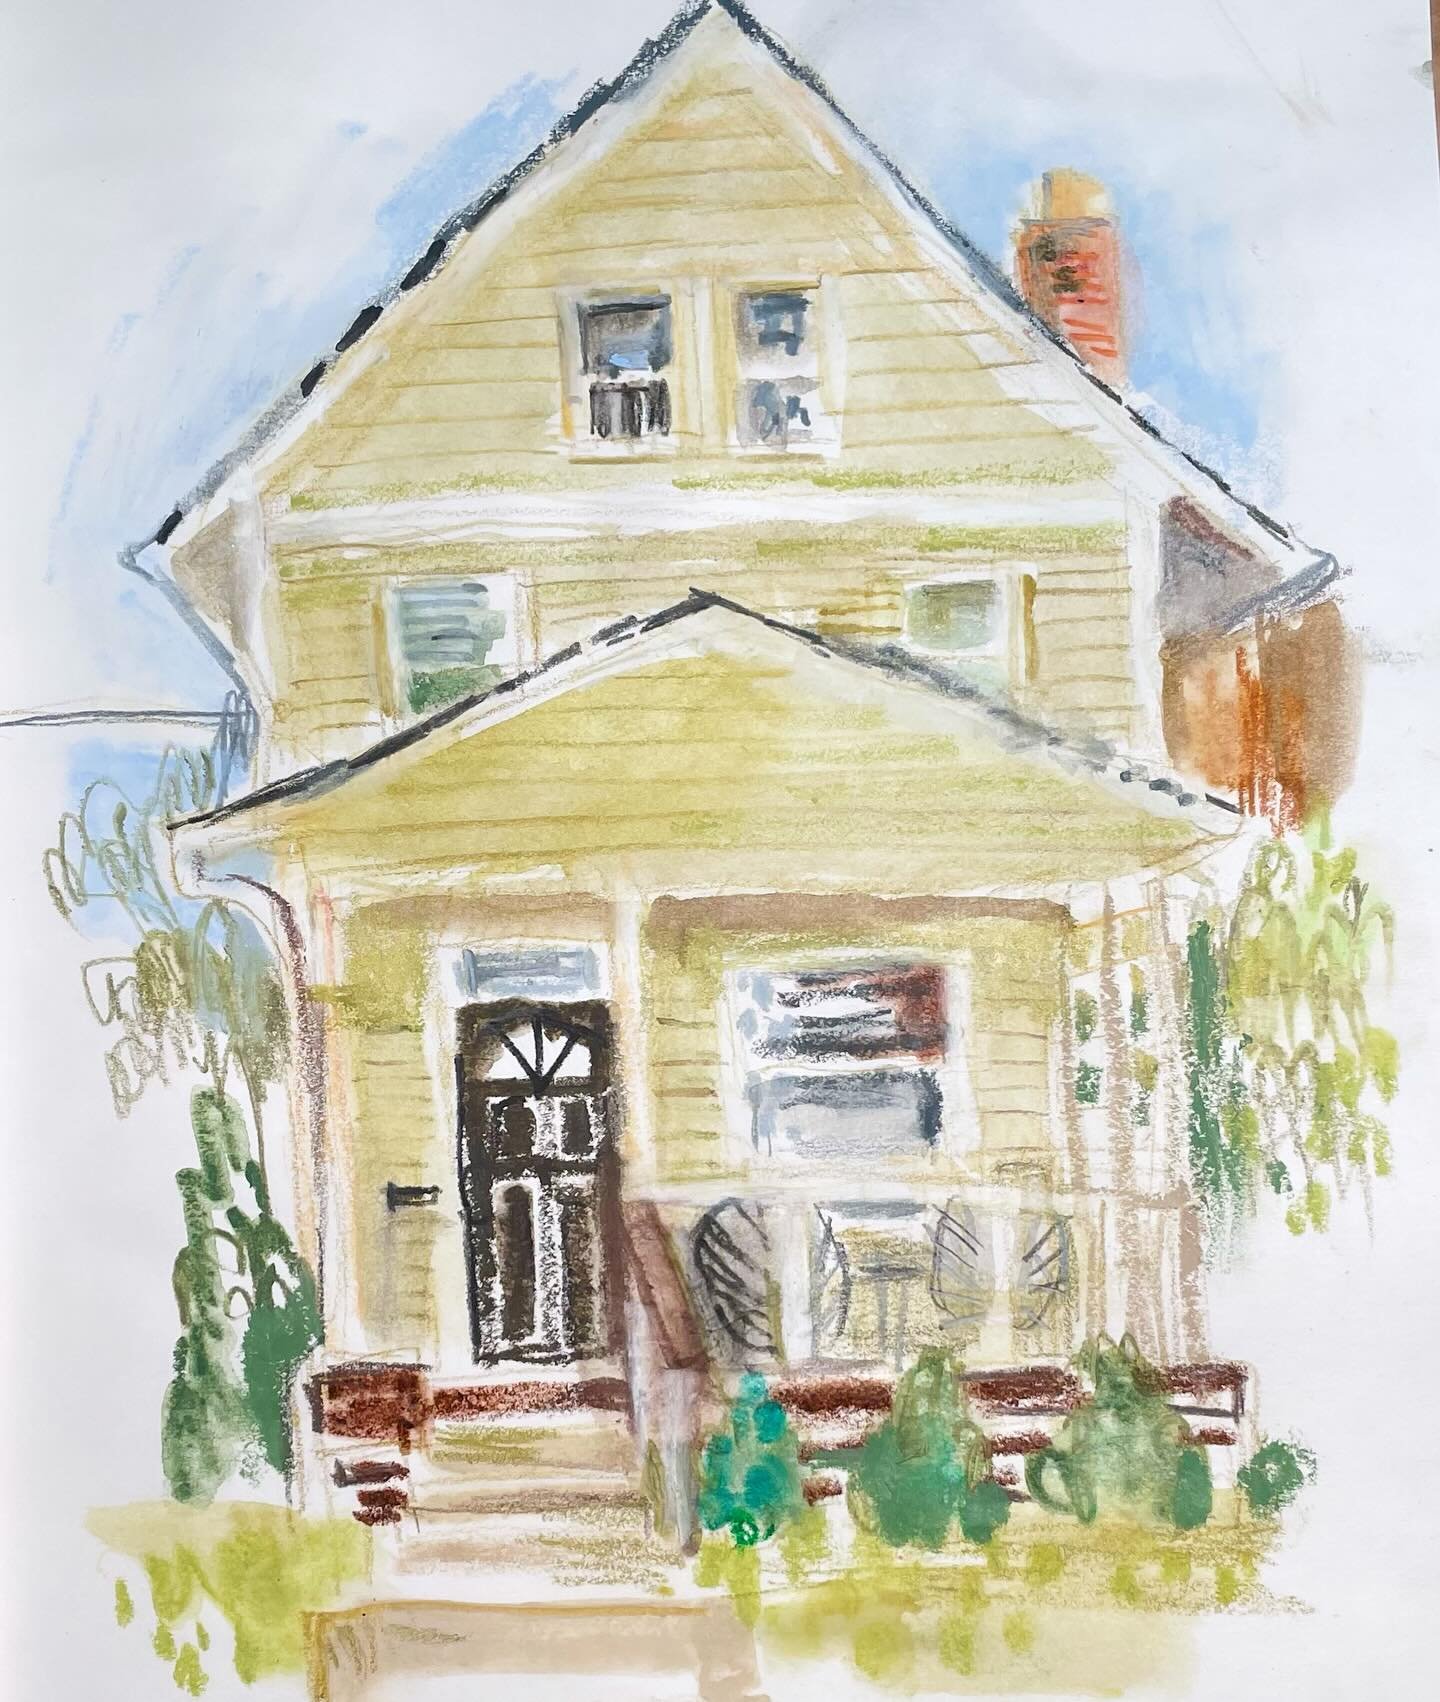 Today&rsquo;s post: my house.
#sketch #house #housestudy #housesofinstagram #facade #sketchbook